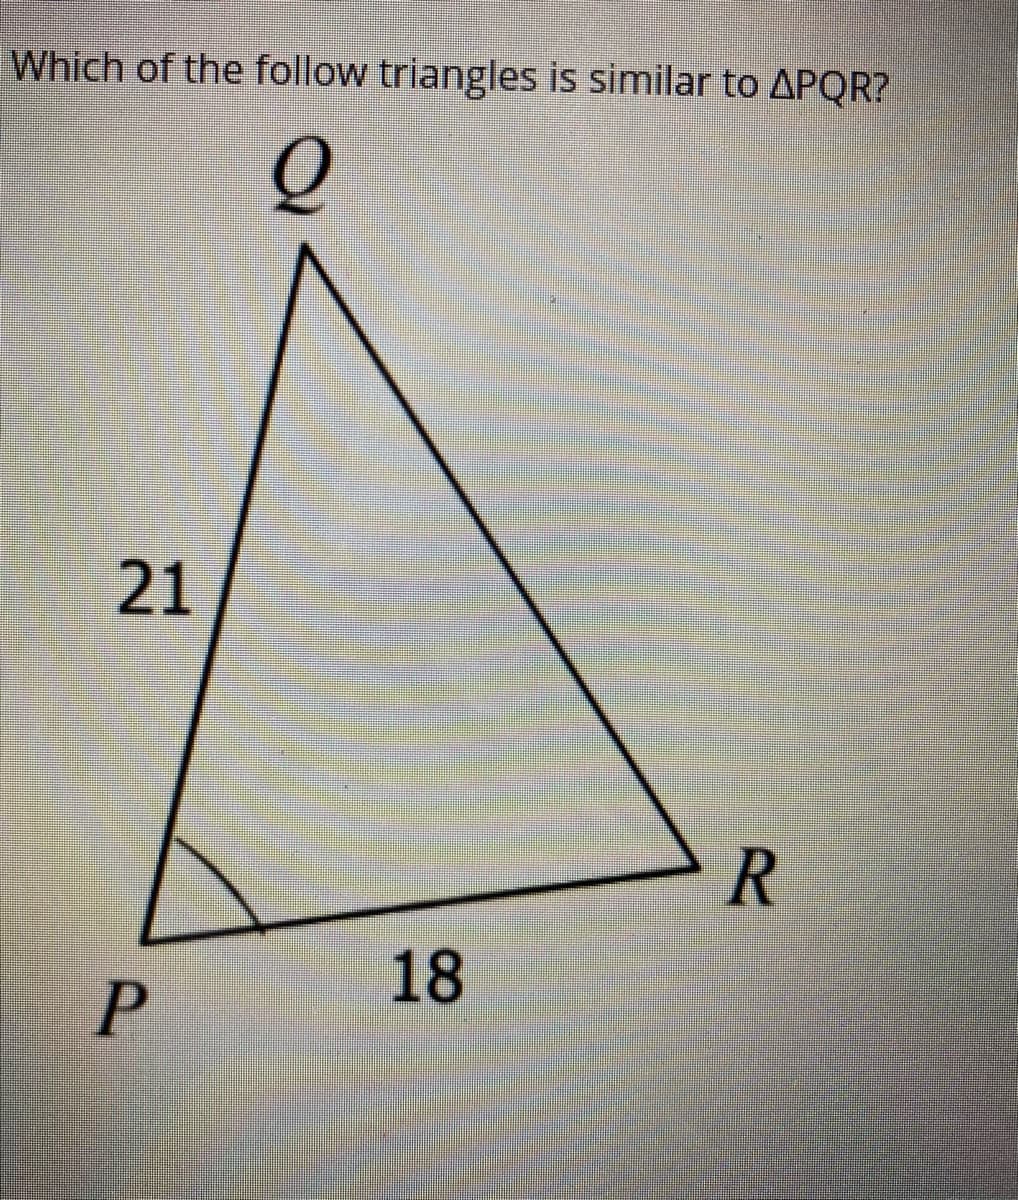 Which of the follow triangles is similar to APQR?
21
18
P
